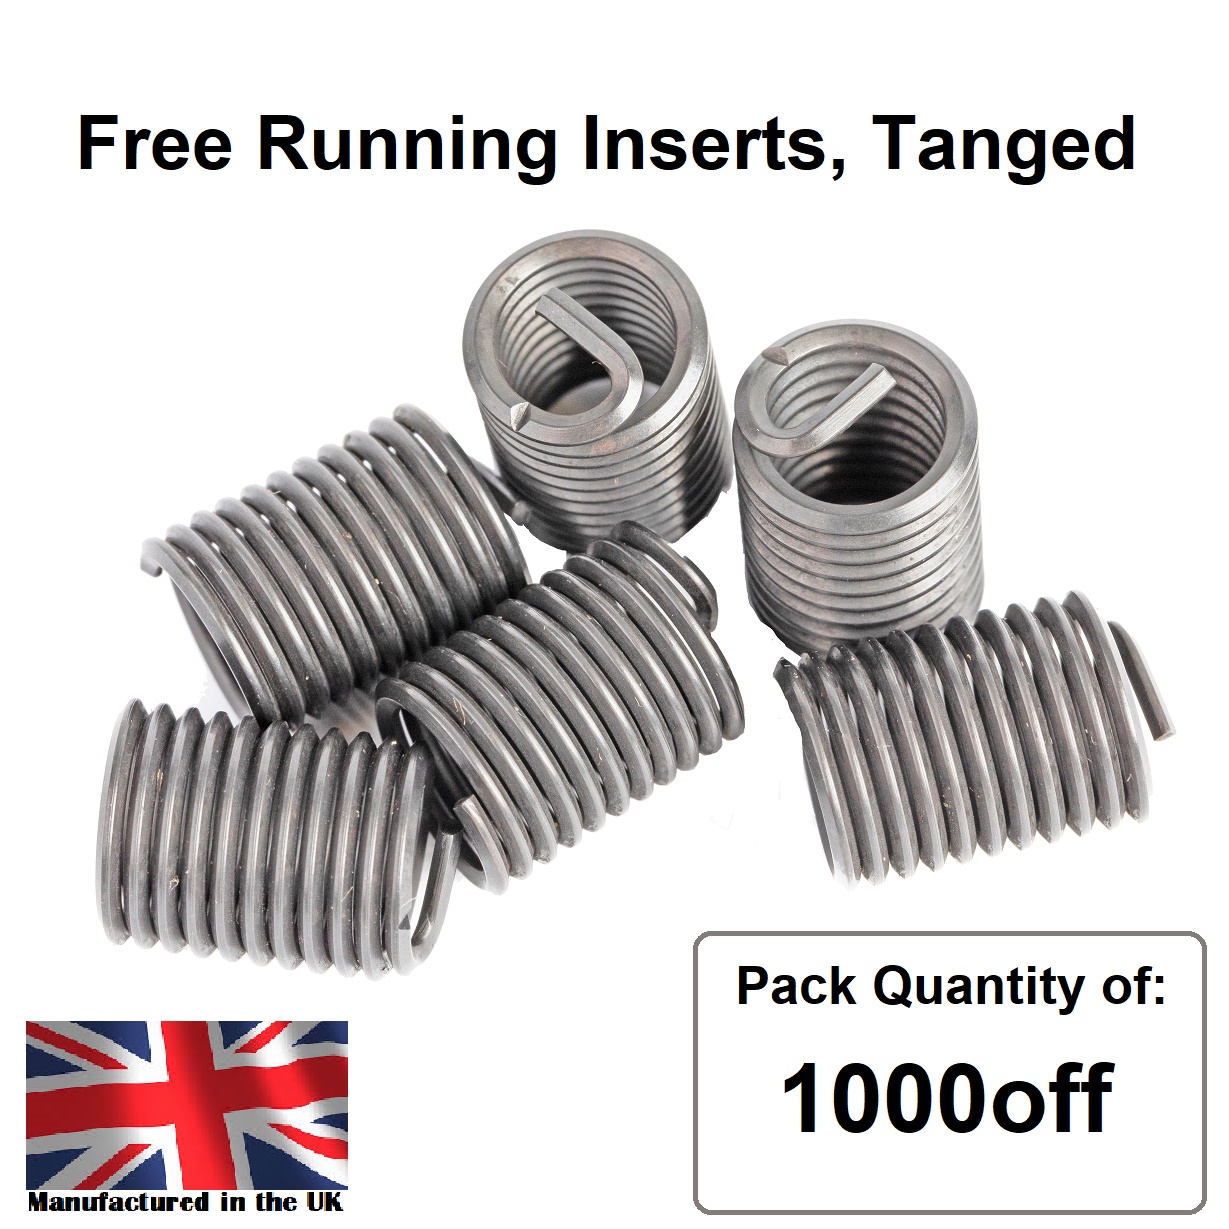 M16 x 2.0 x 3D Metric Coarse, Free Running, Tanged, Wire Thread Repair Insert, 304/A2 Stainless (Pack 1000)